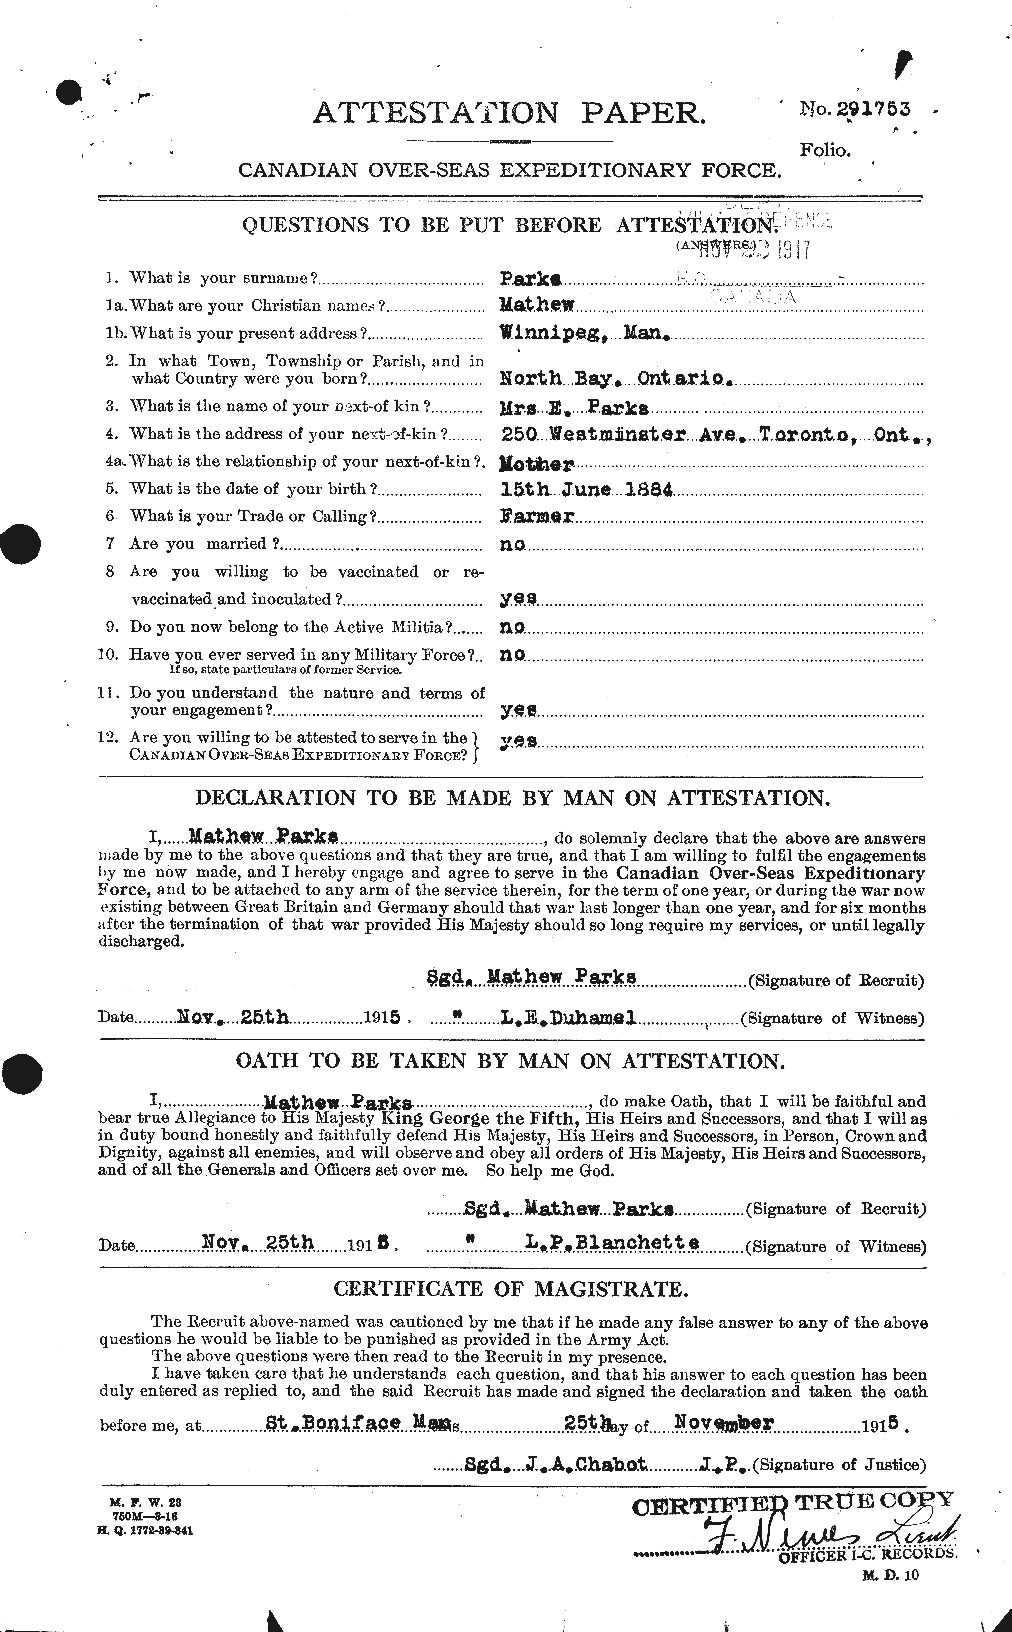 Personnel Records of the First World War - CEF 566186a